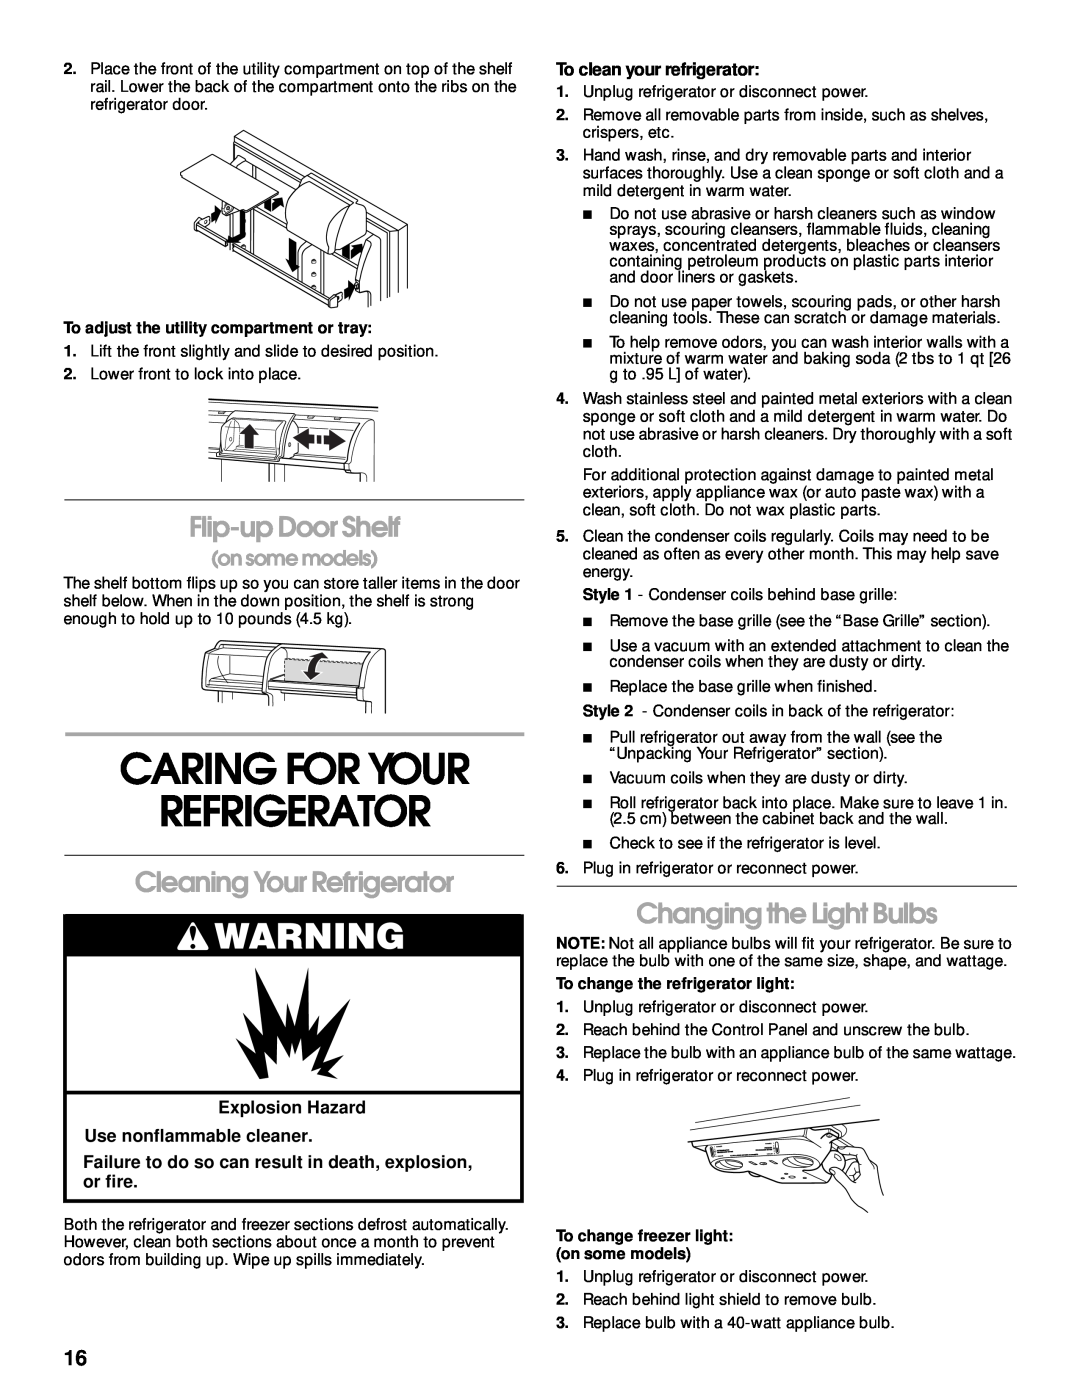 Whirlpool ST21PKXJW00 manual Caring For Your Refrigerator, Flip-up Door Shelf, Cleaning Your Refrigerator, on some models 